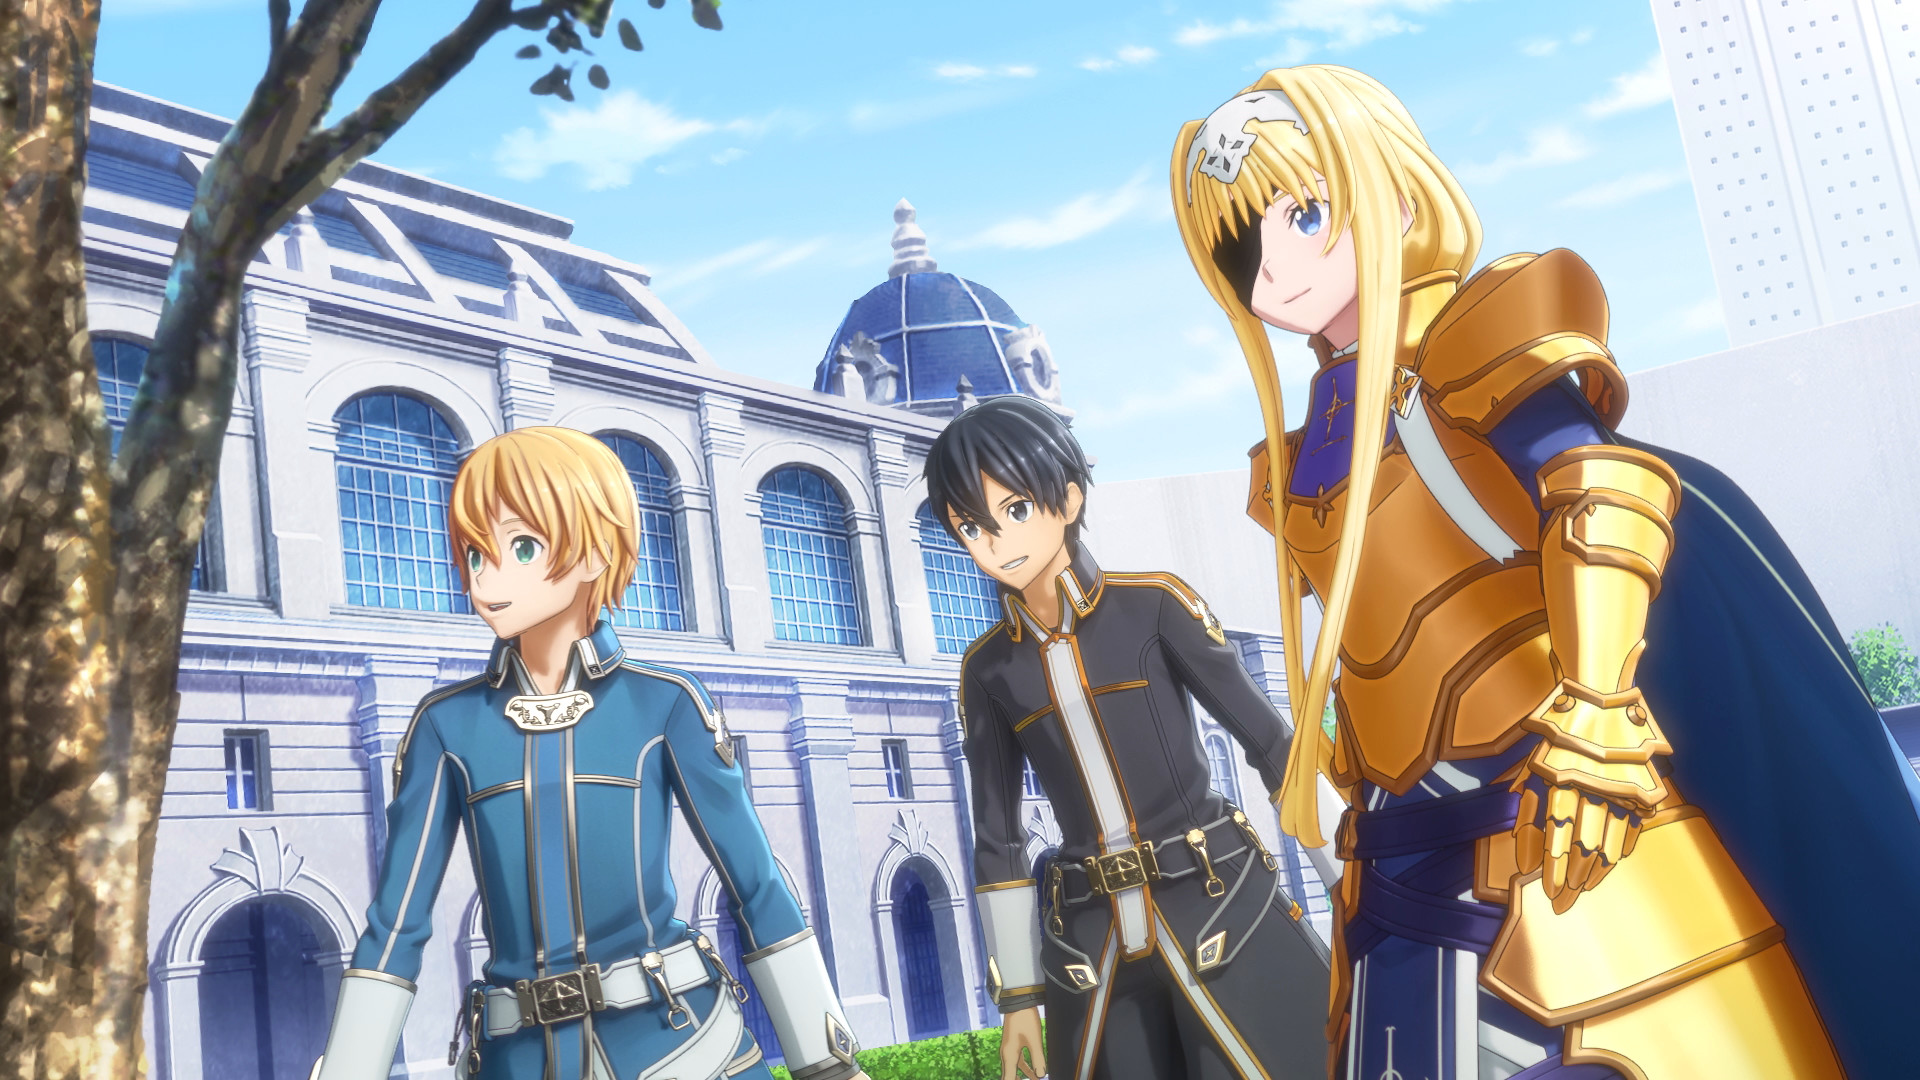 Crunchyroll - Sword Art Online: Alicization Lycoris Aims to Improve Frame  Rate and More in Update